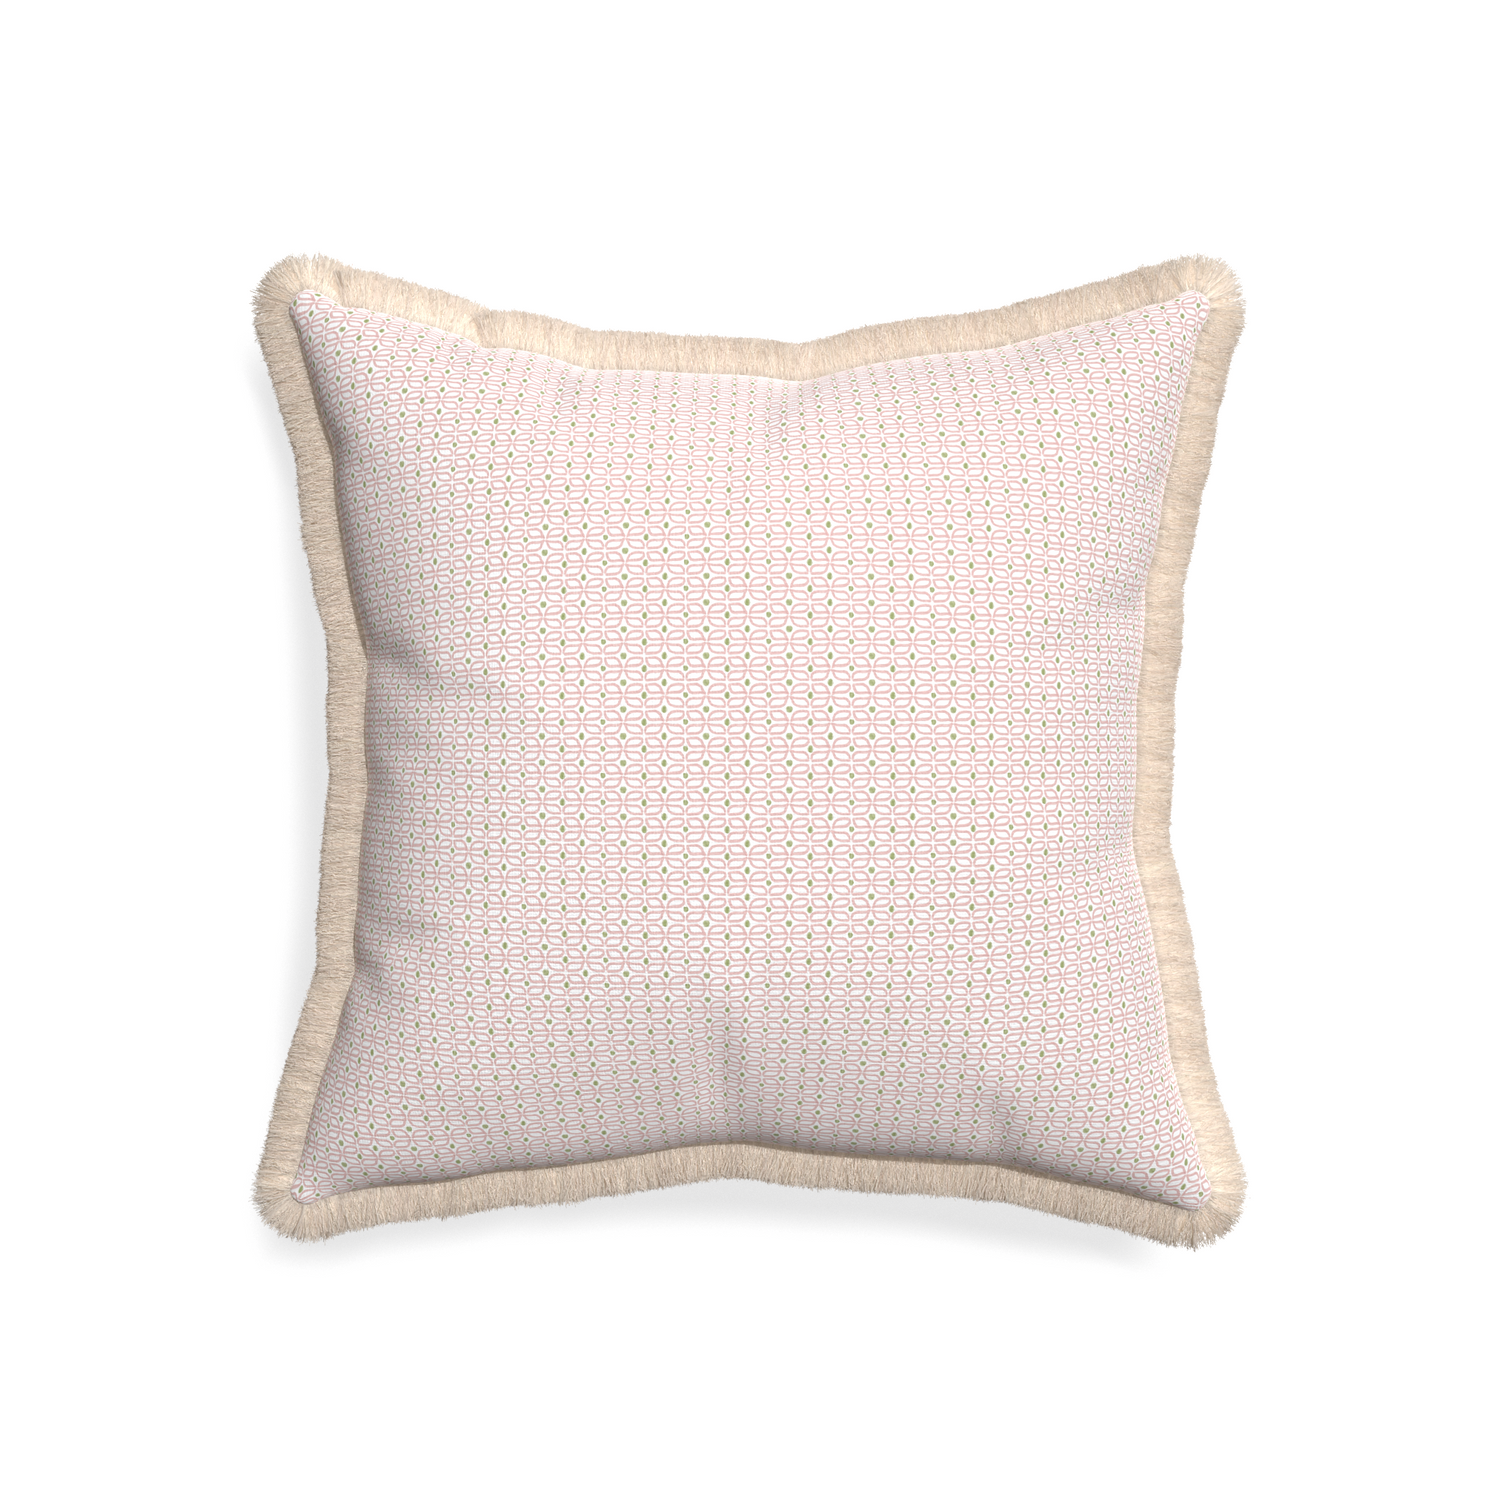 20-square loomi pink custom pink geometricpillow with cream fringe on white background